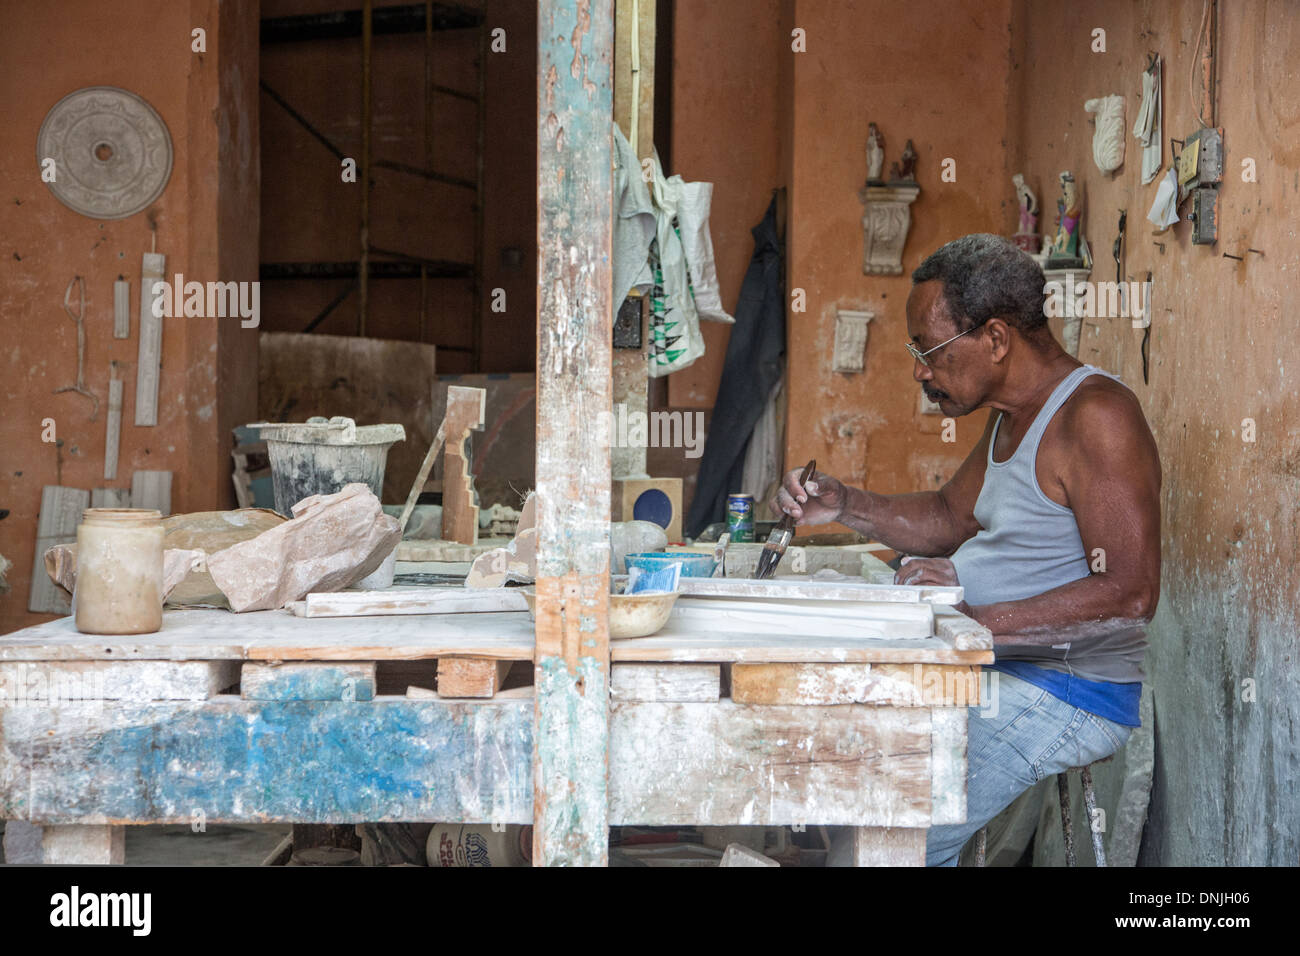 WORKSHOP MAKING MOULDINGS, SMALL TRADE IN THE OLD TOWN, HABANA VIEJA, HAVANA, CUBA, THE CARIBBEAN Stock Photo